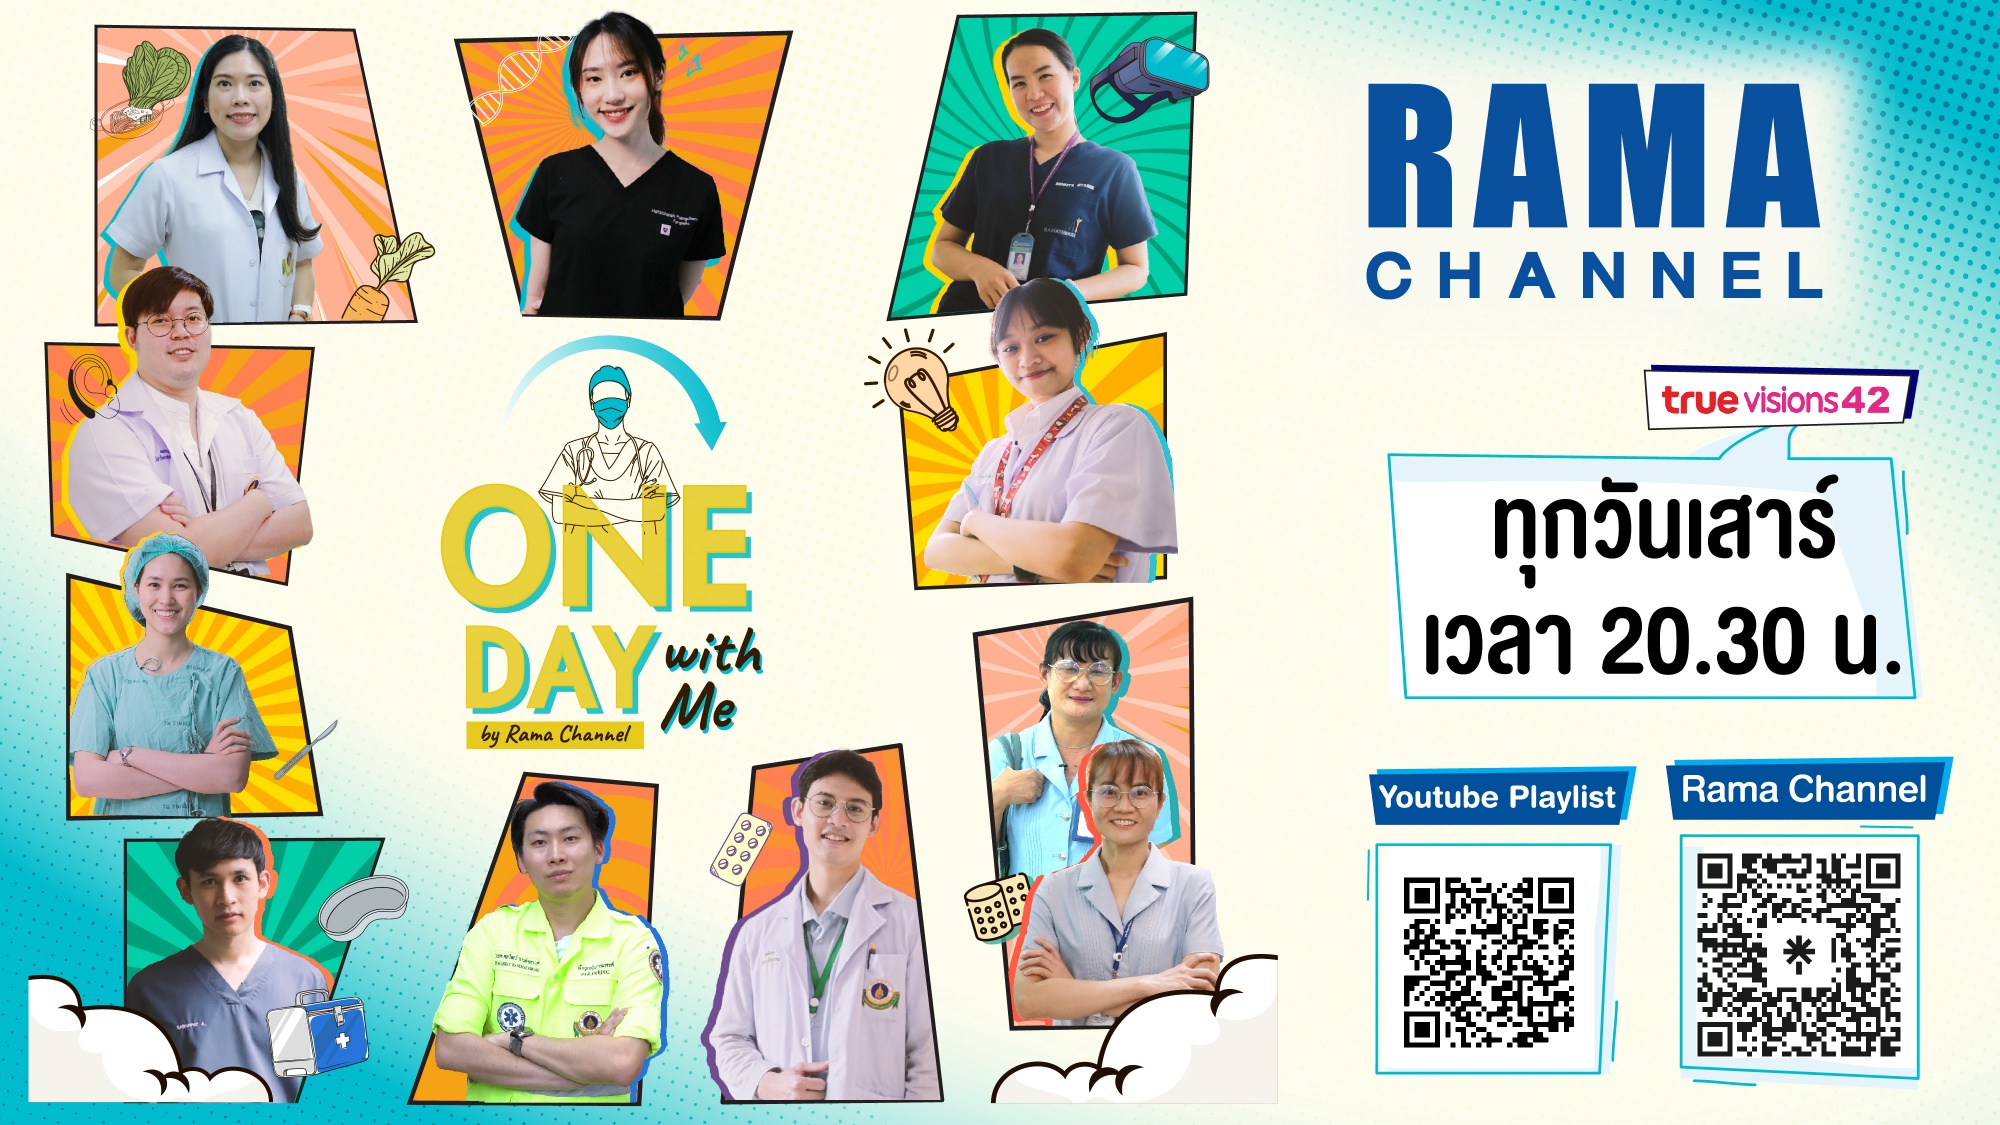 ONE DAY with Me by Rama Channel